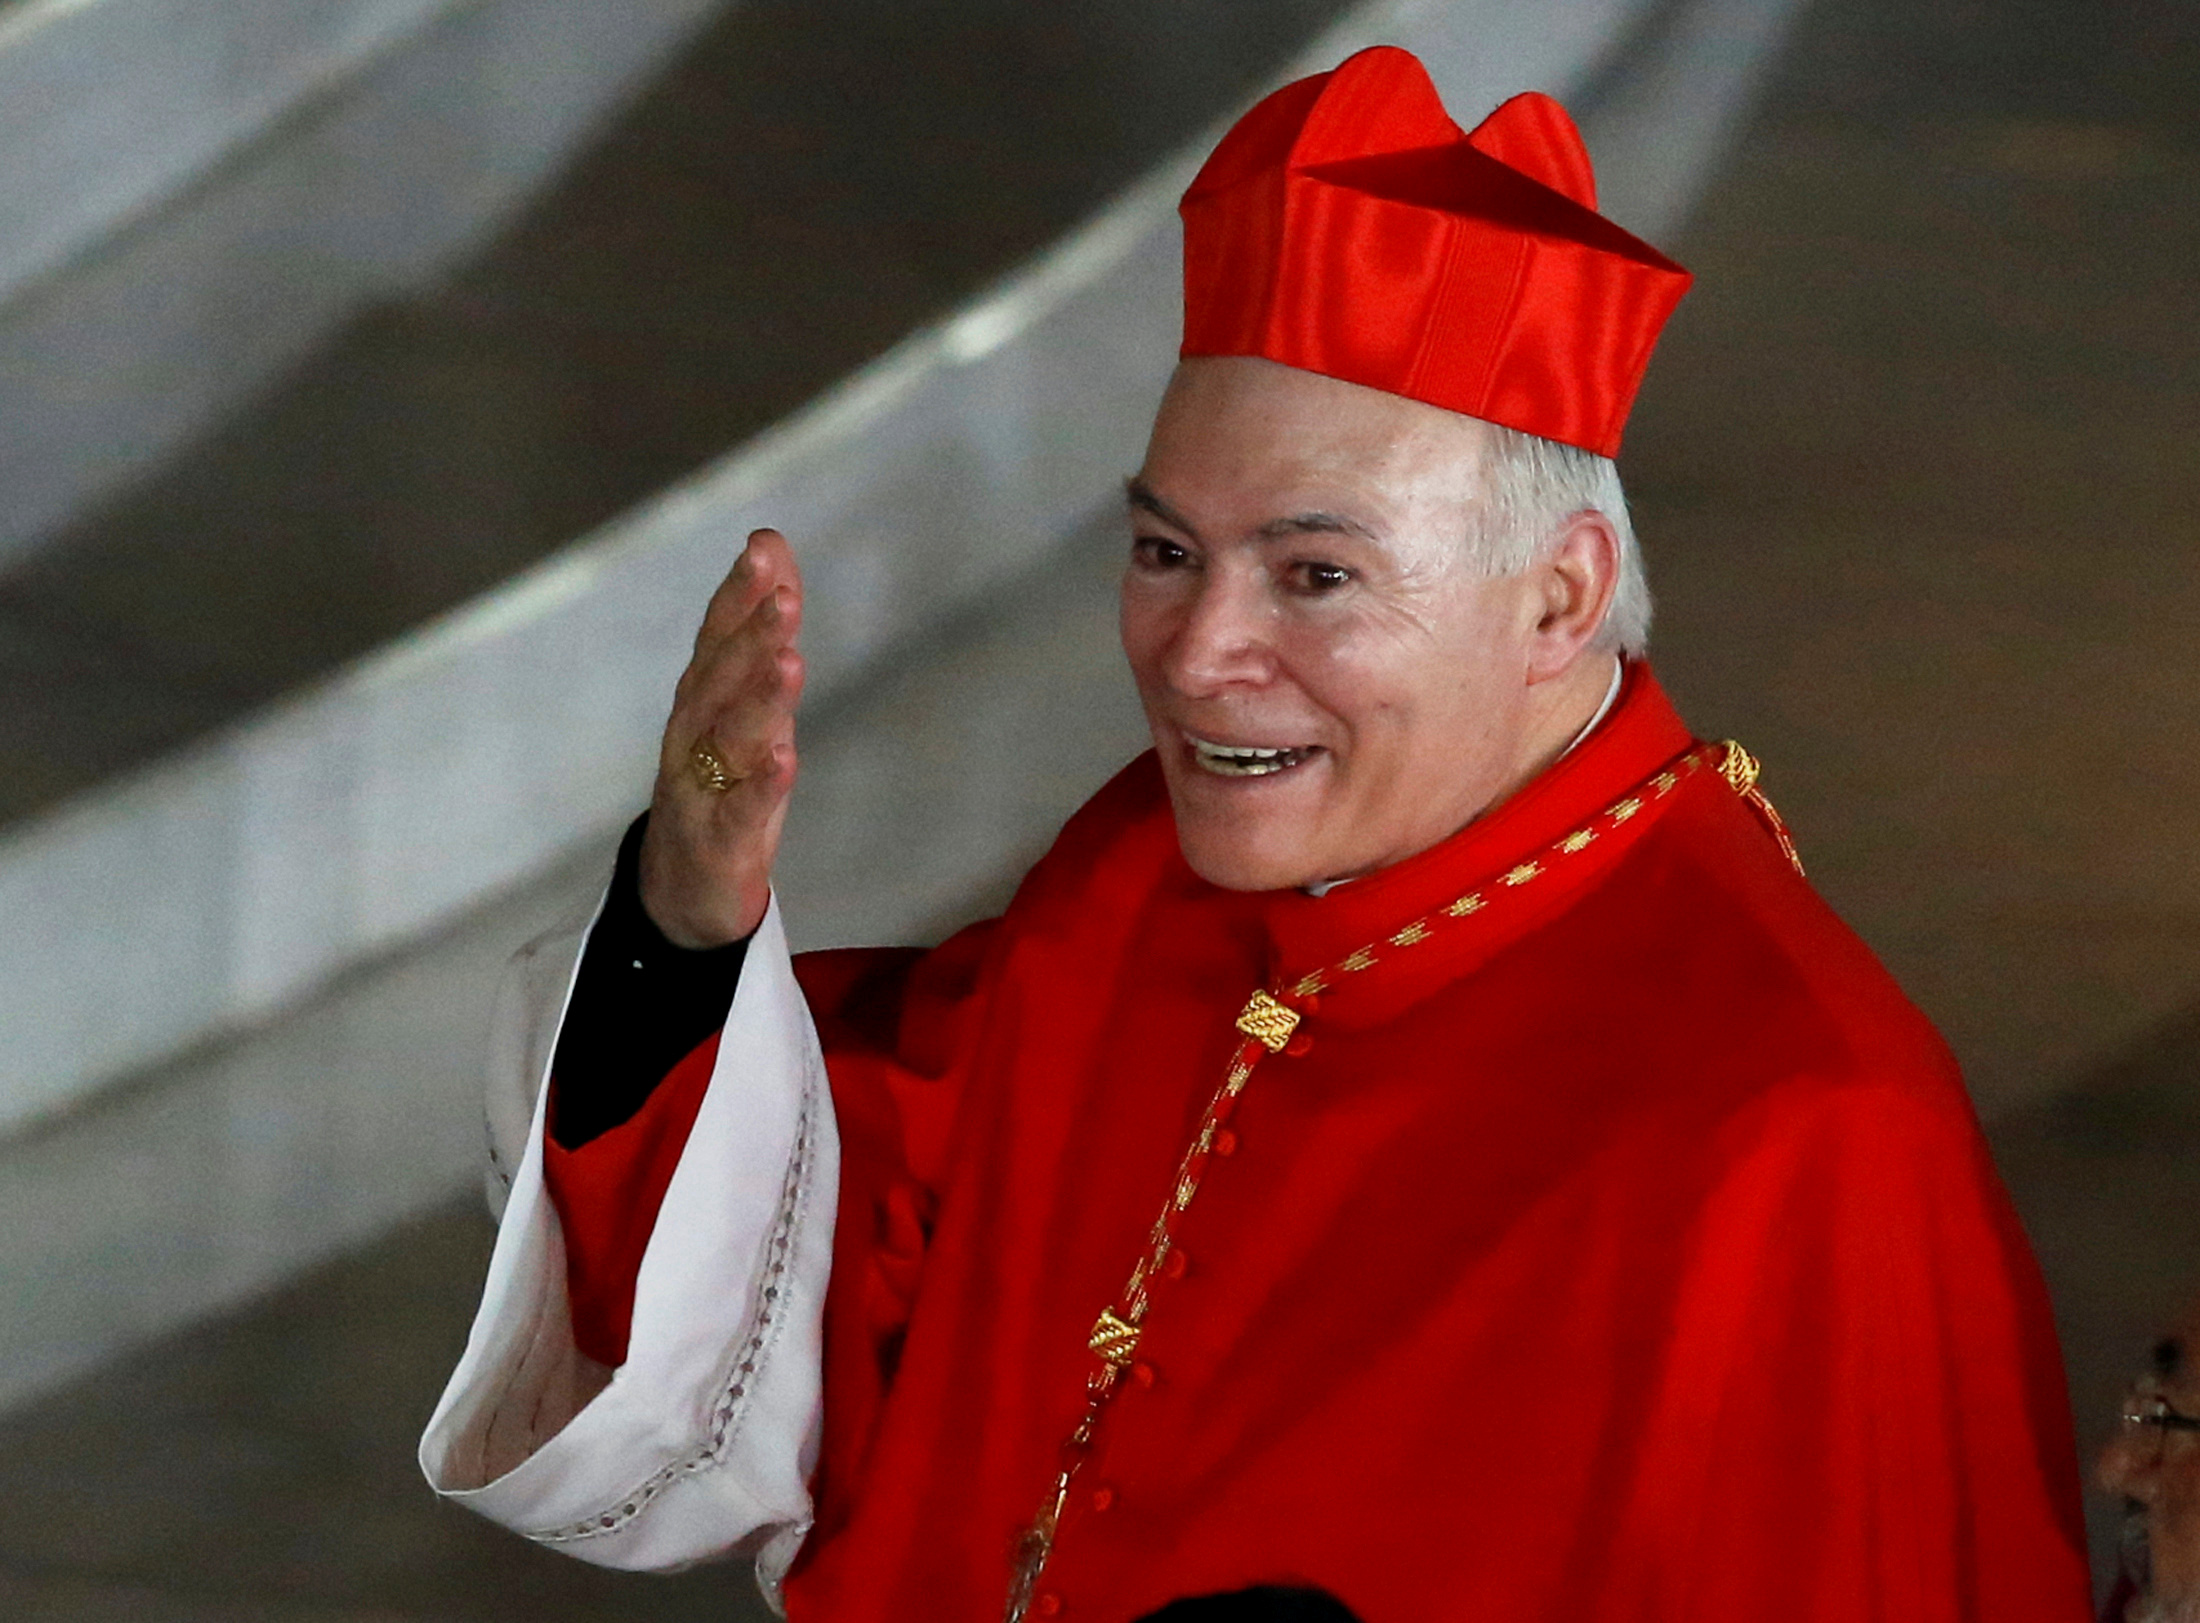 Cardinal Retes arrives to take part in the inauguration ceremony as Mexico's new Archbishop, in Mexico City